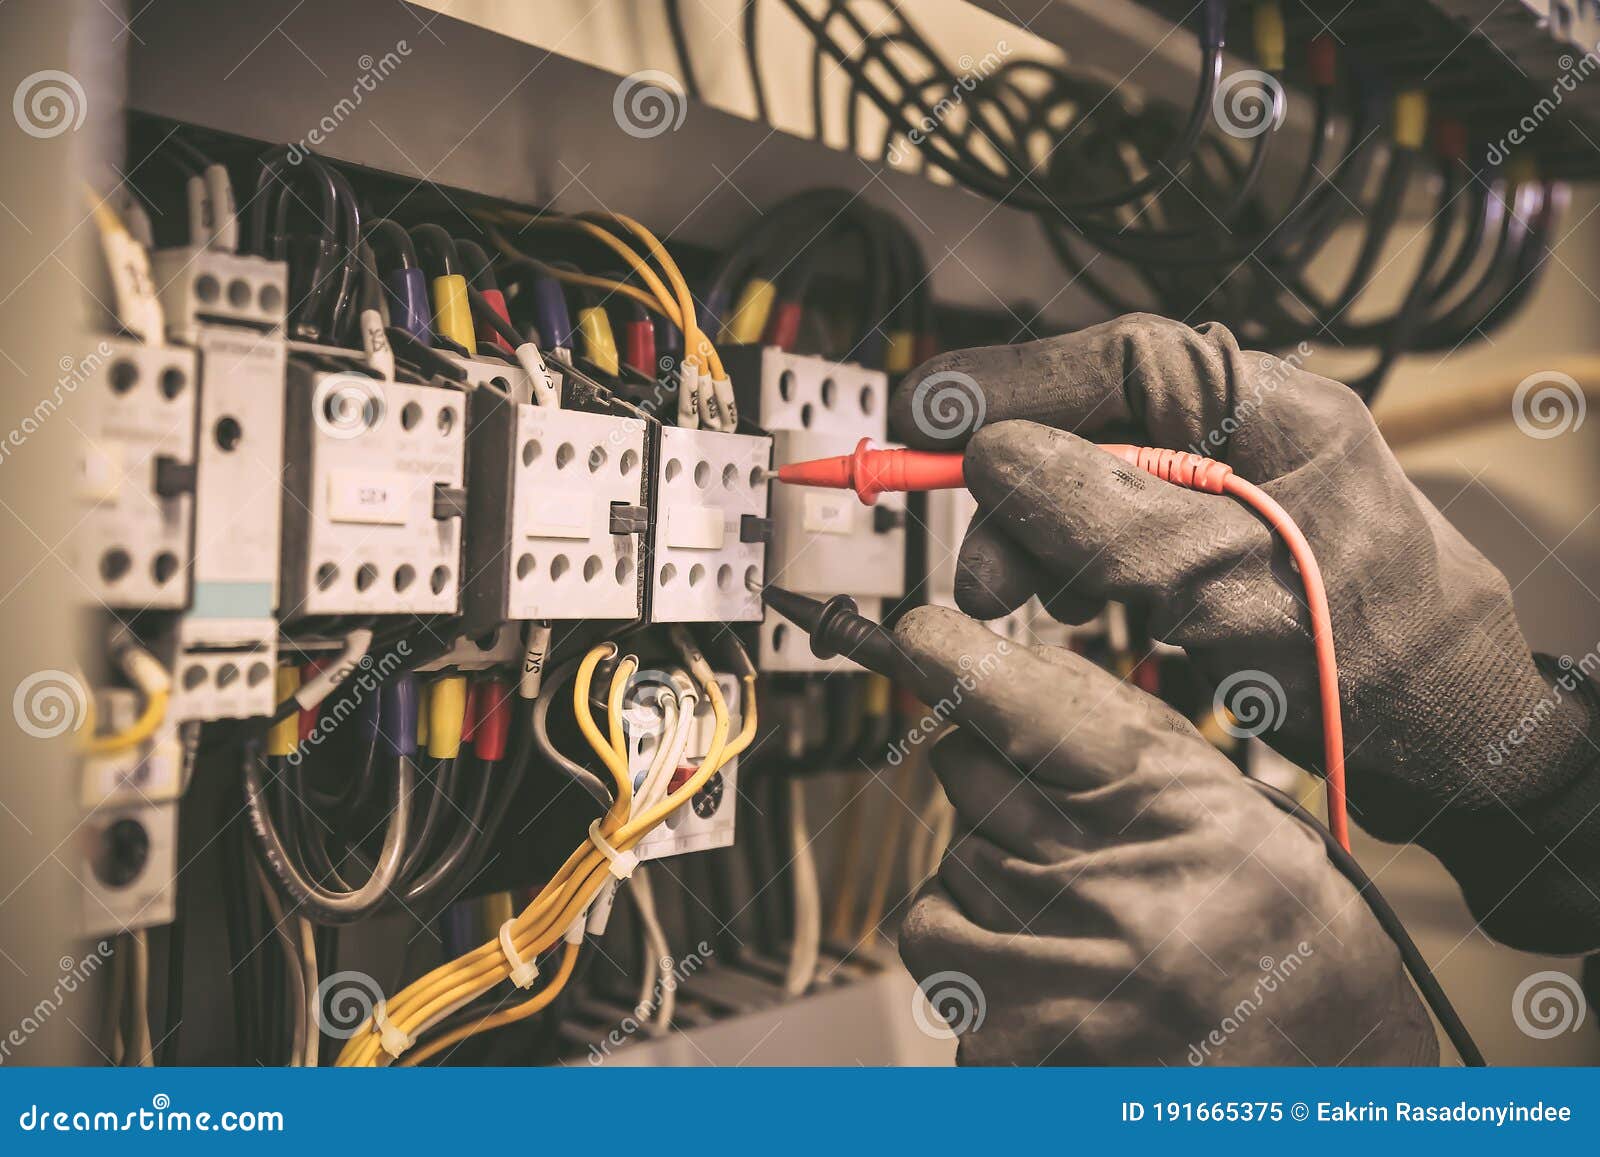 electrical engineer using digital multi-meter measuring equipment to checking electric current voltage at circuit breaker